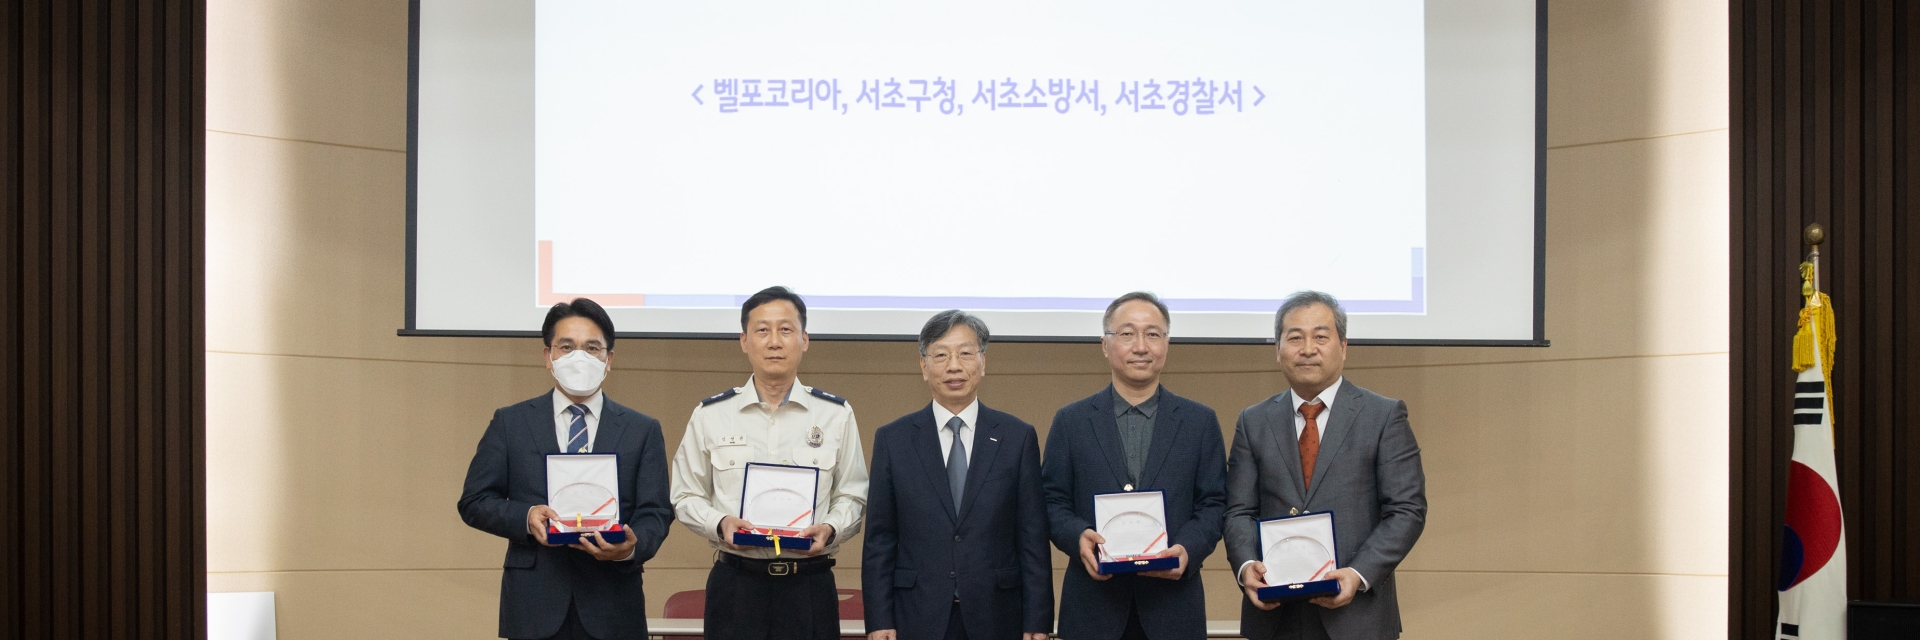  BELFOR Korea Honored to Attend KOTRA's Safety and Health Declaration Ceremony